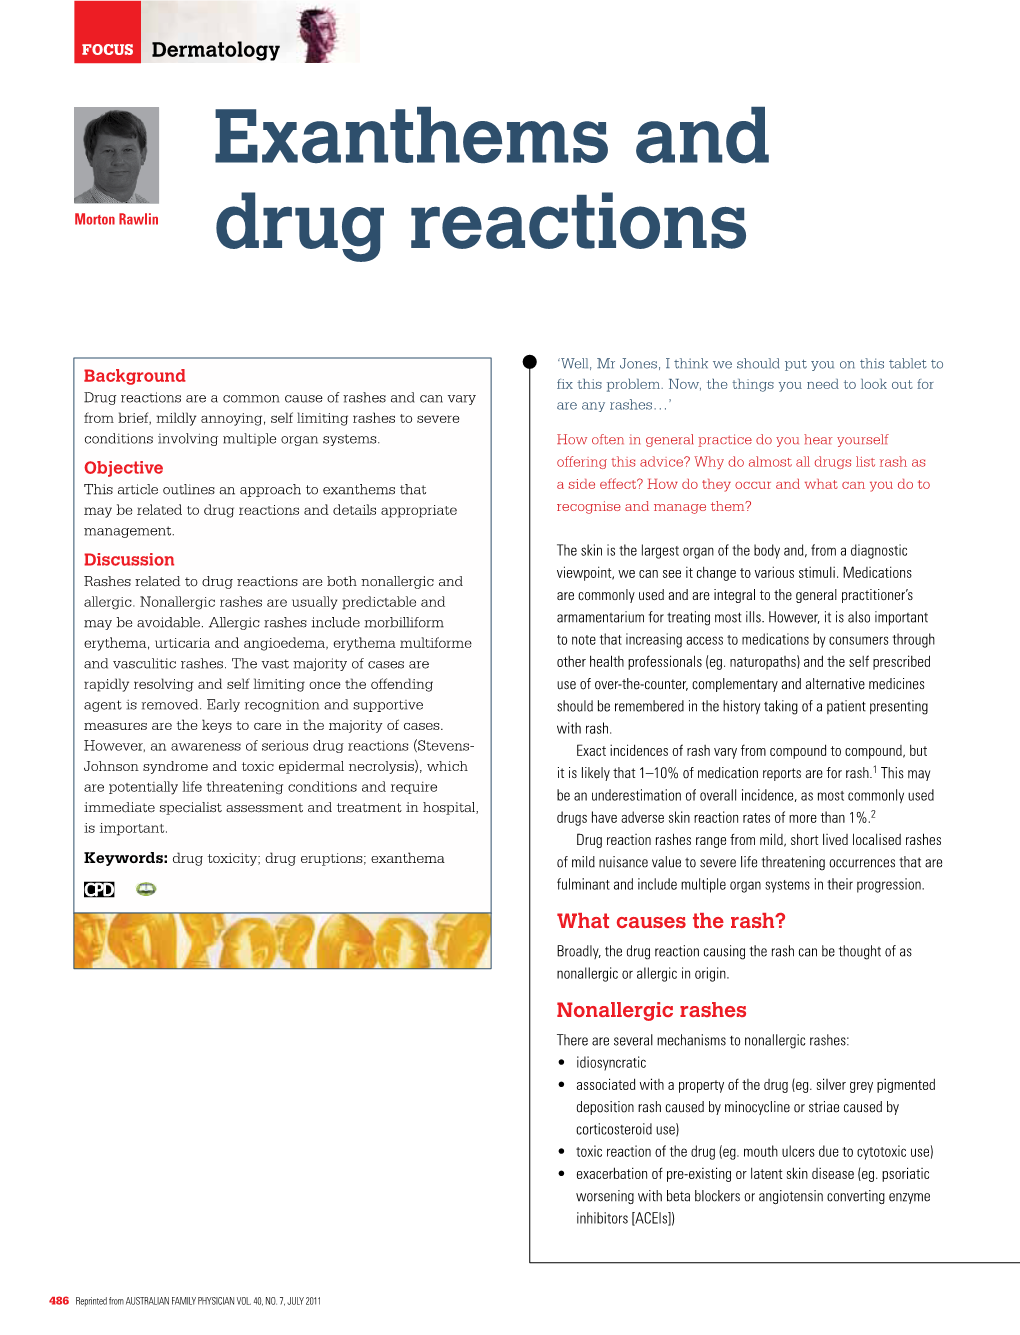 Exanthems and Drug Reactions